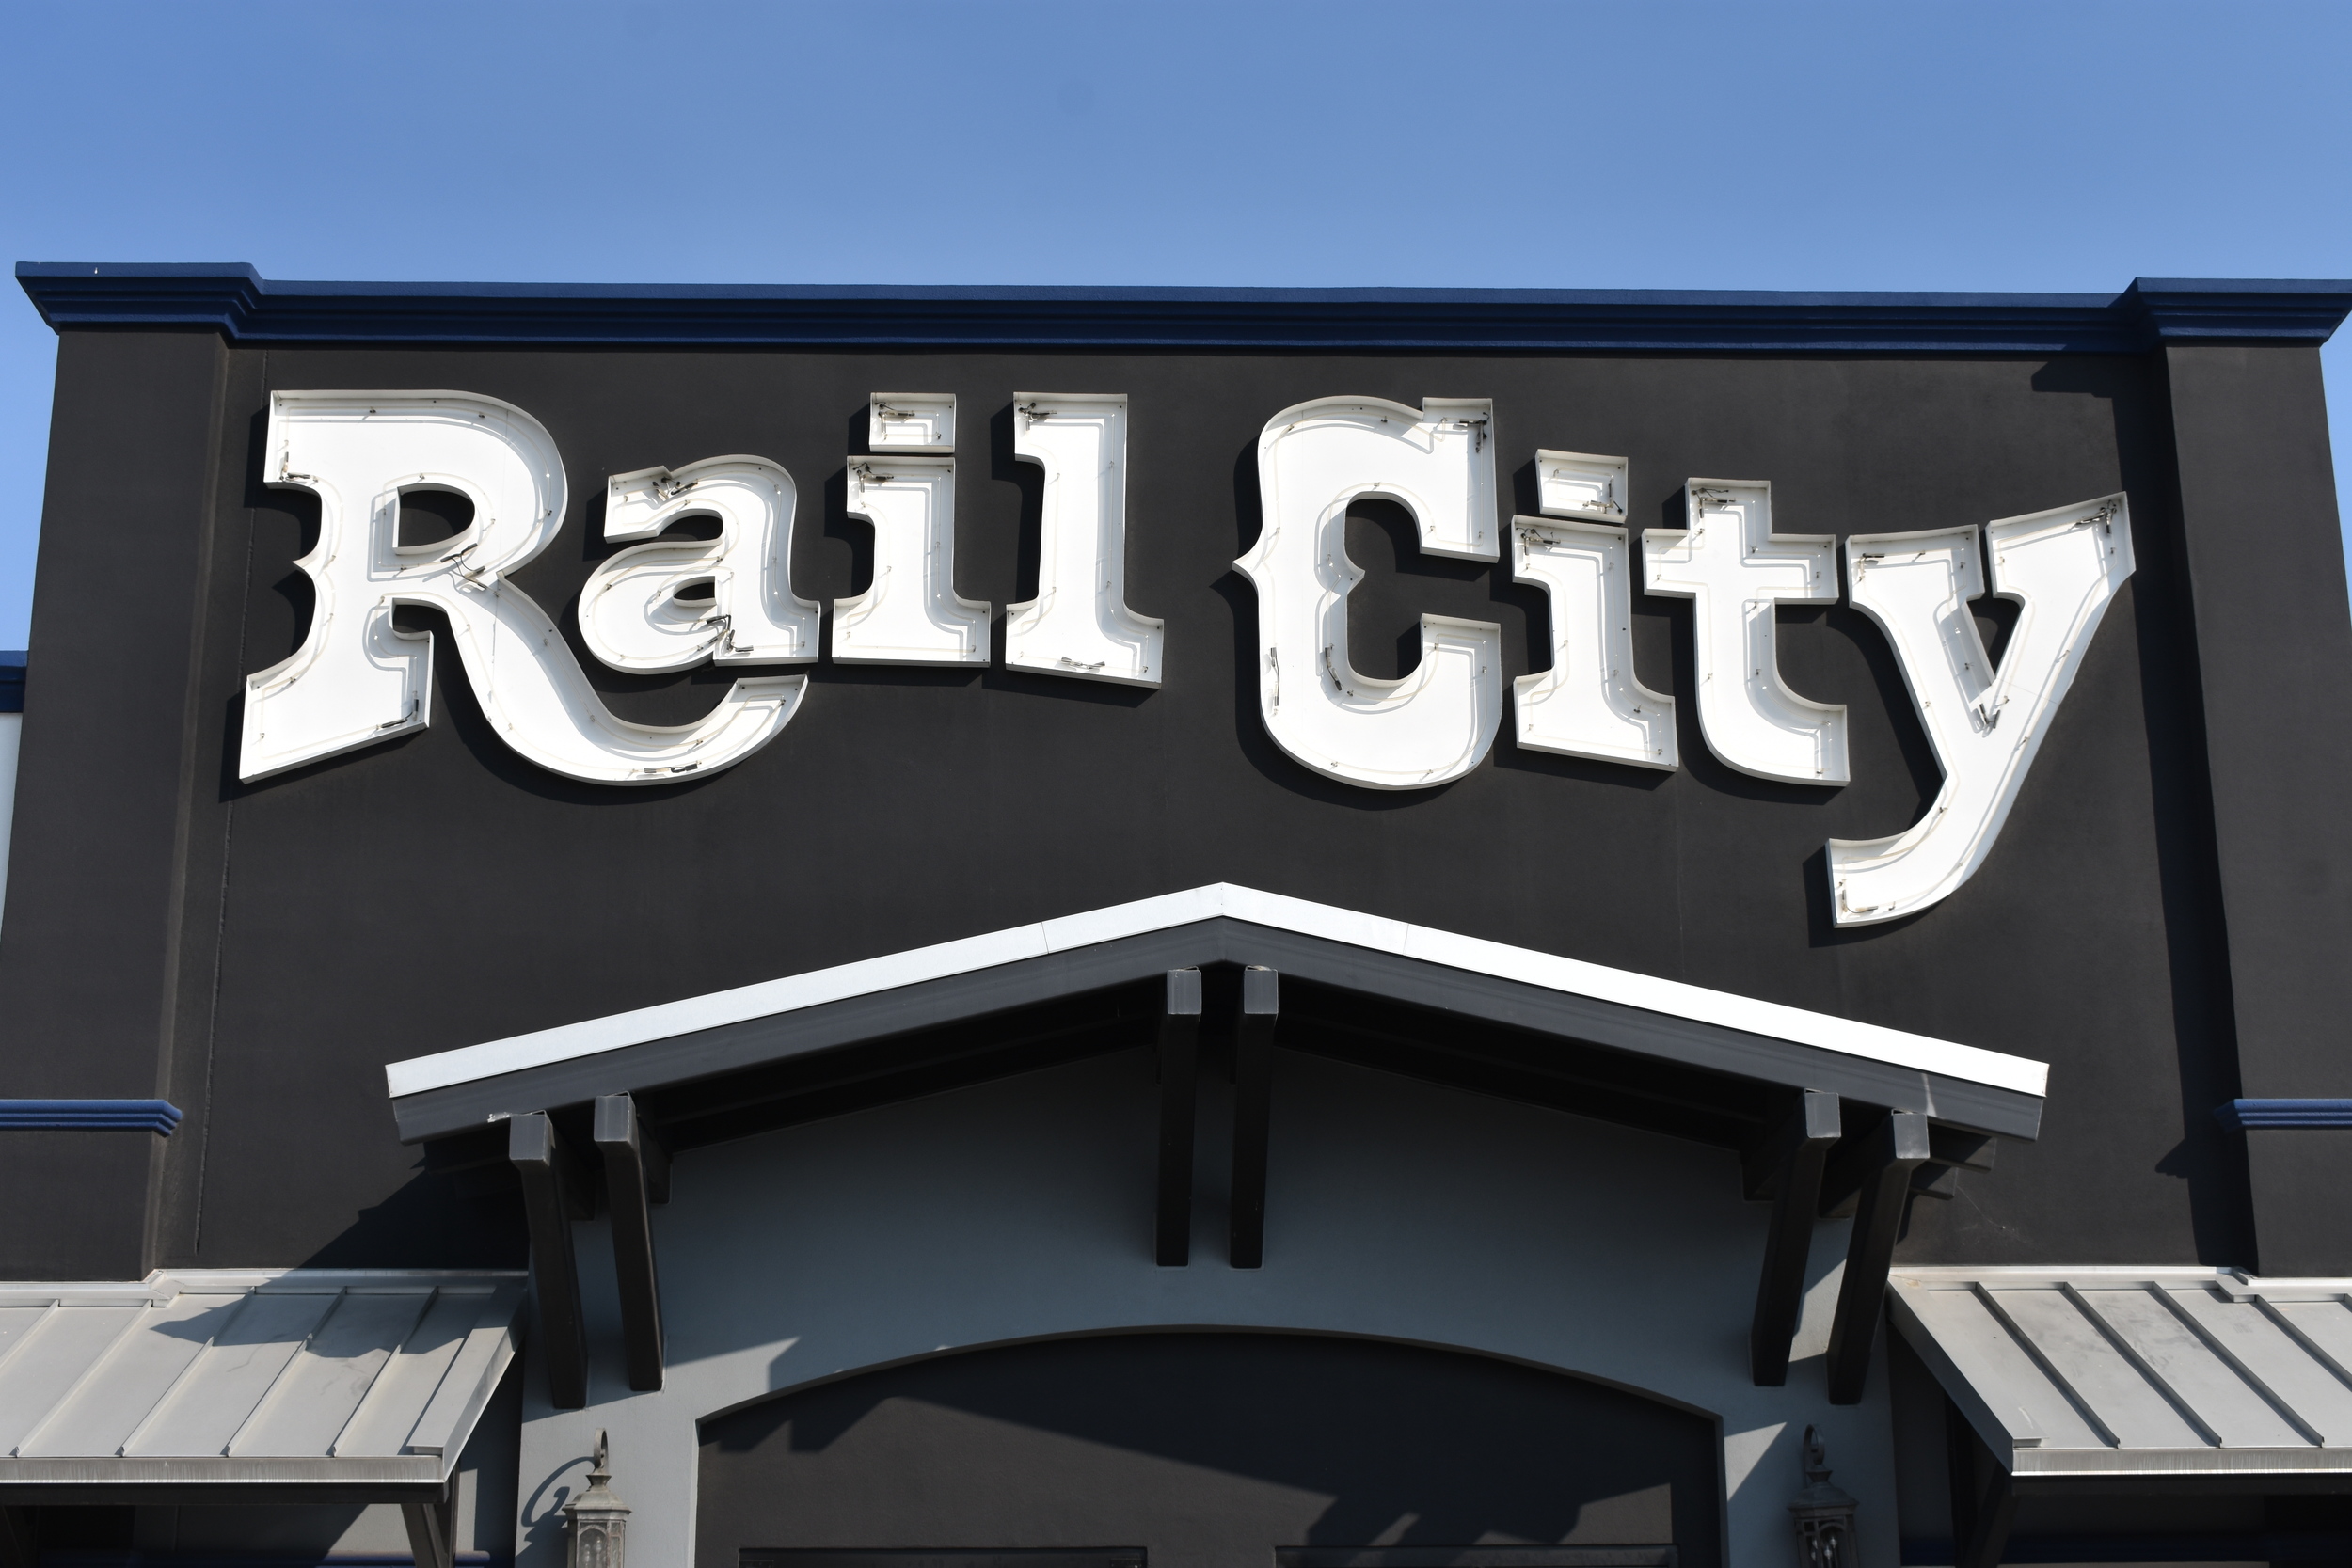 Rail City Casino wall mounted sign, Sparks, Nevada